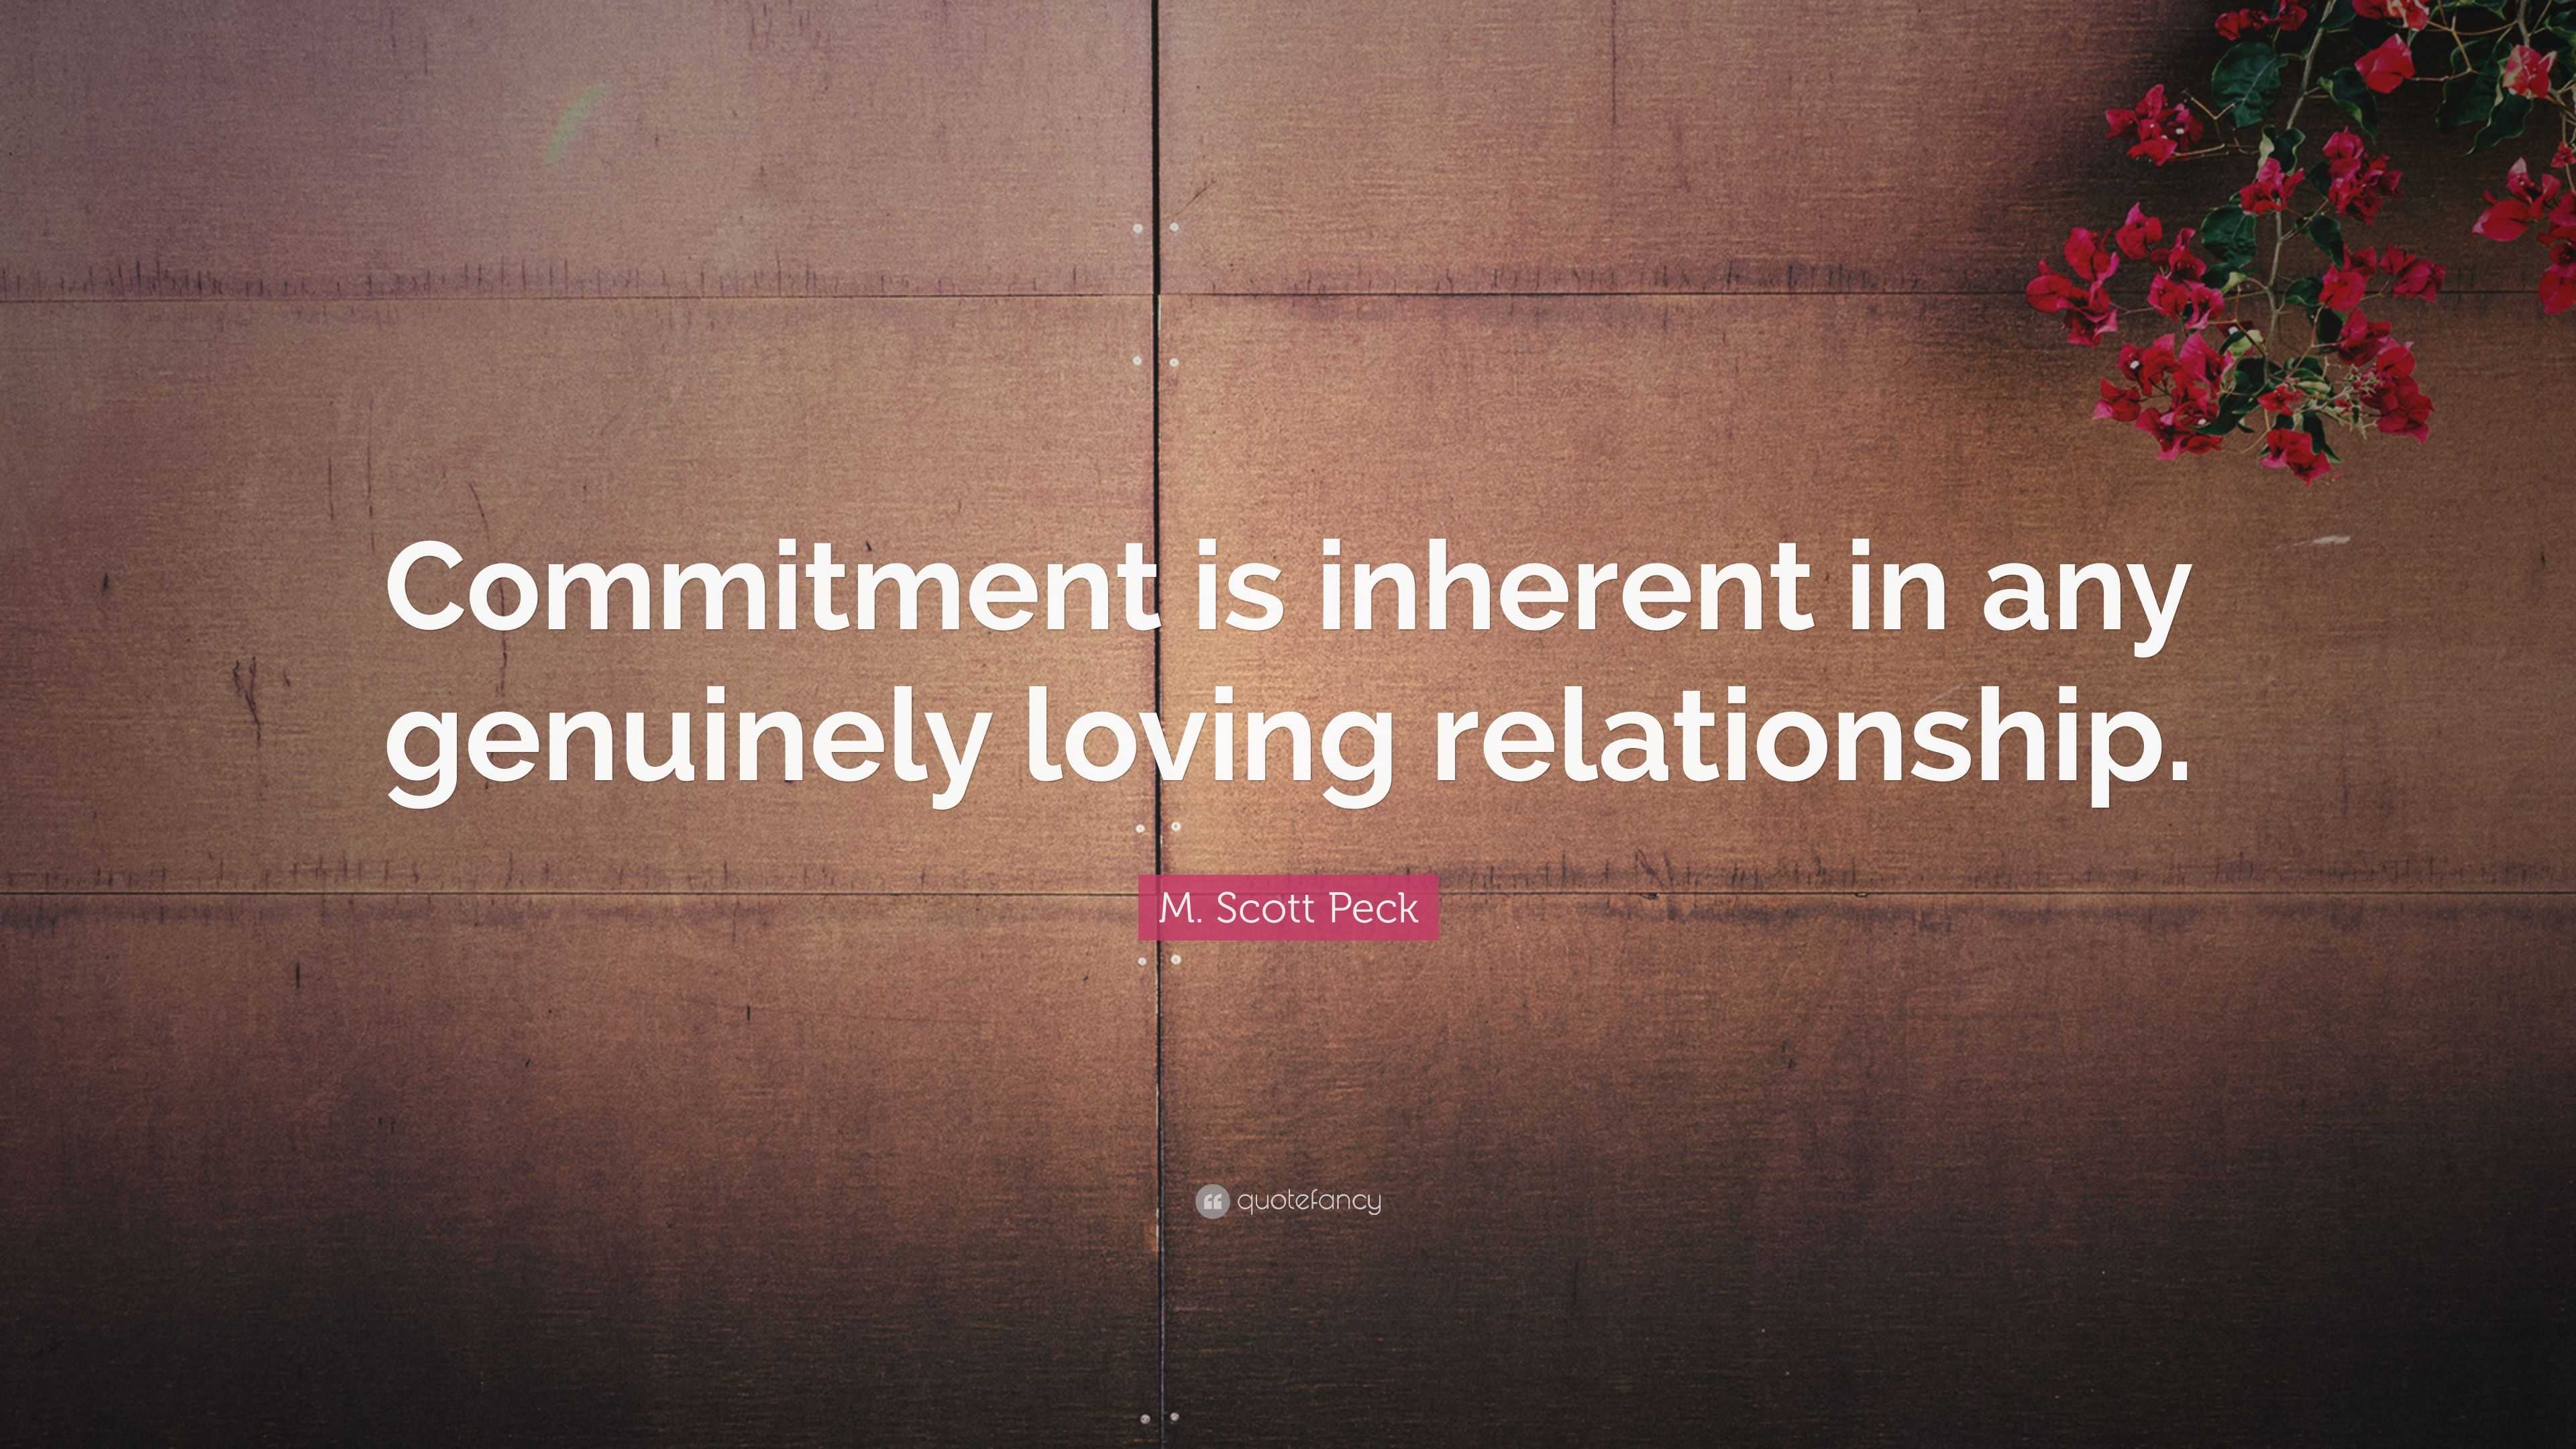 essay about commitment to relationship